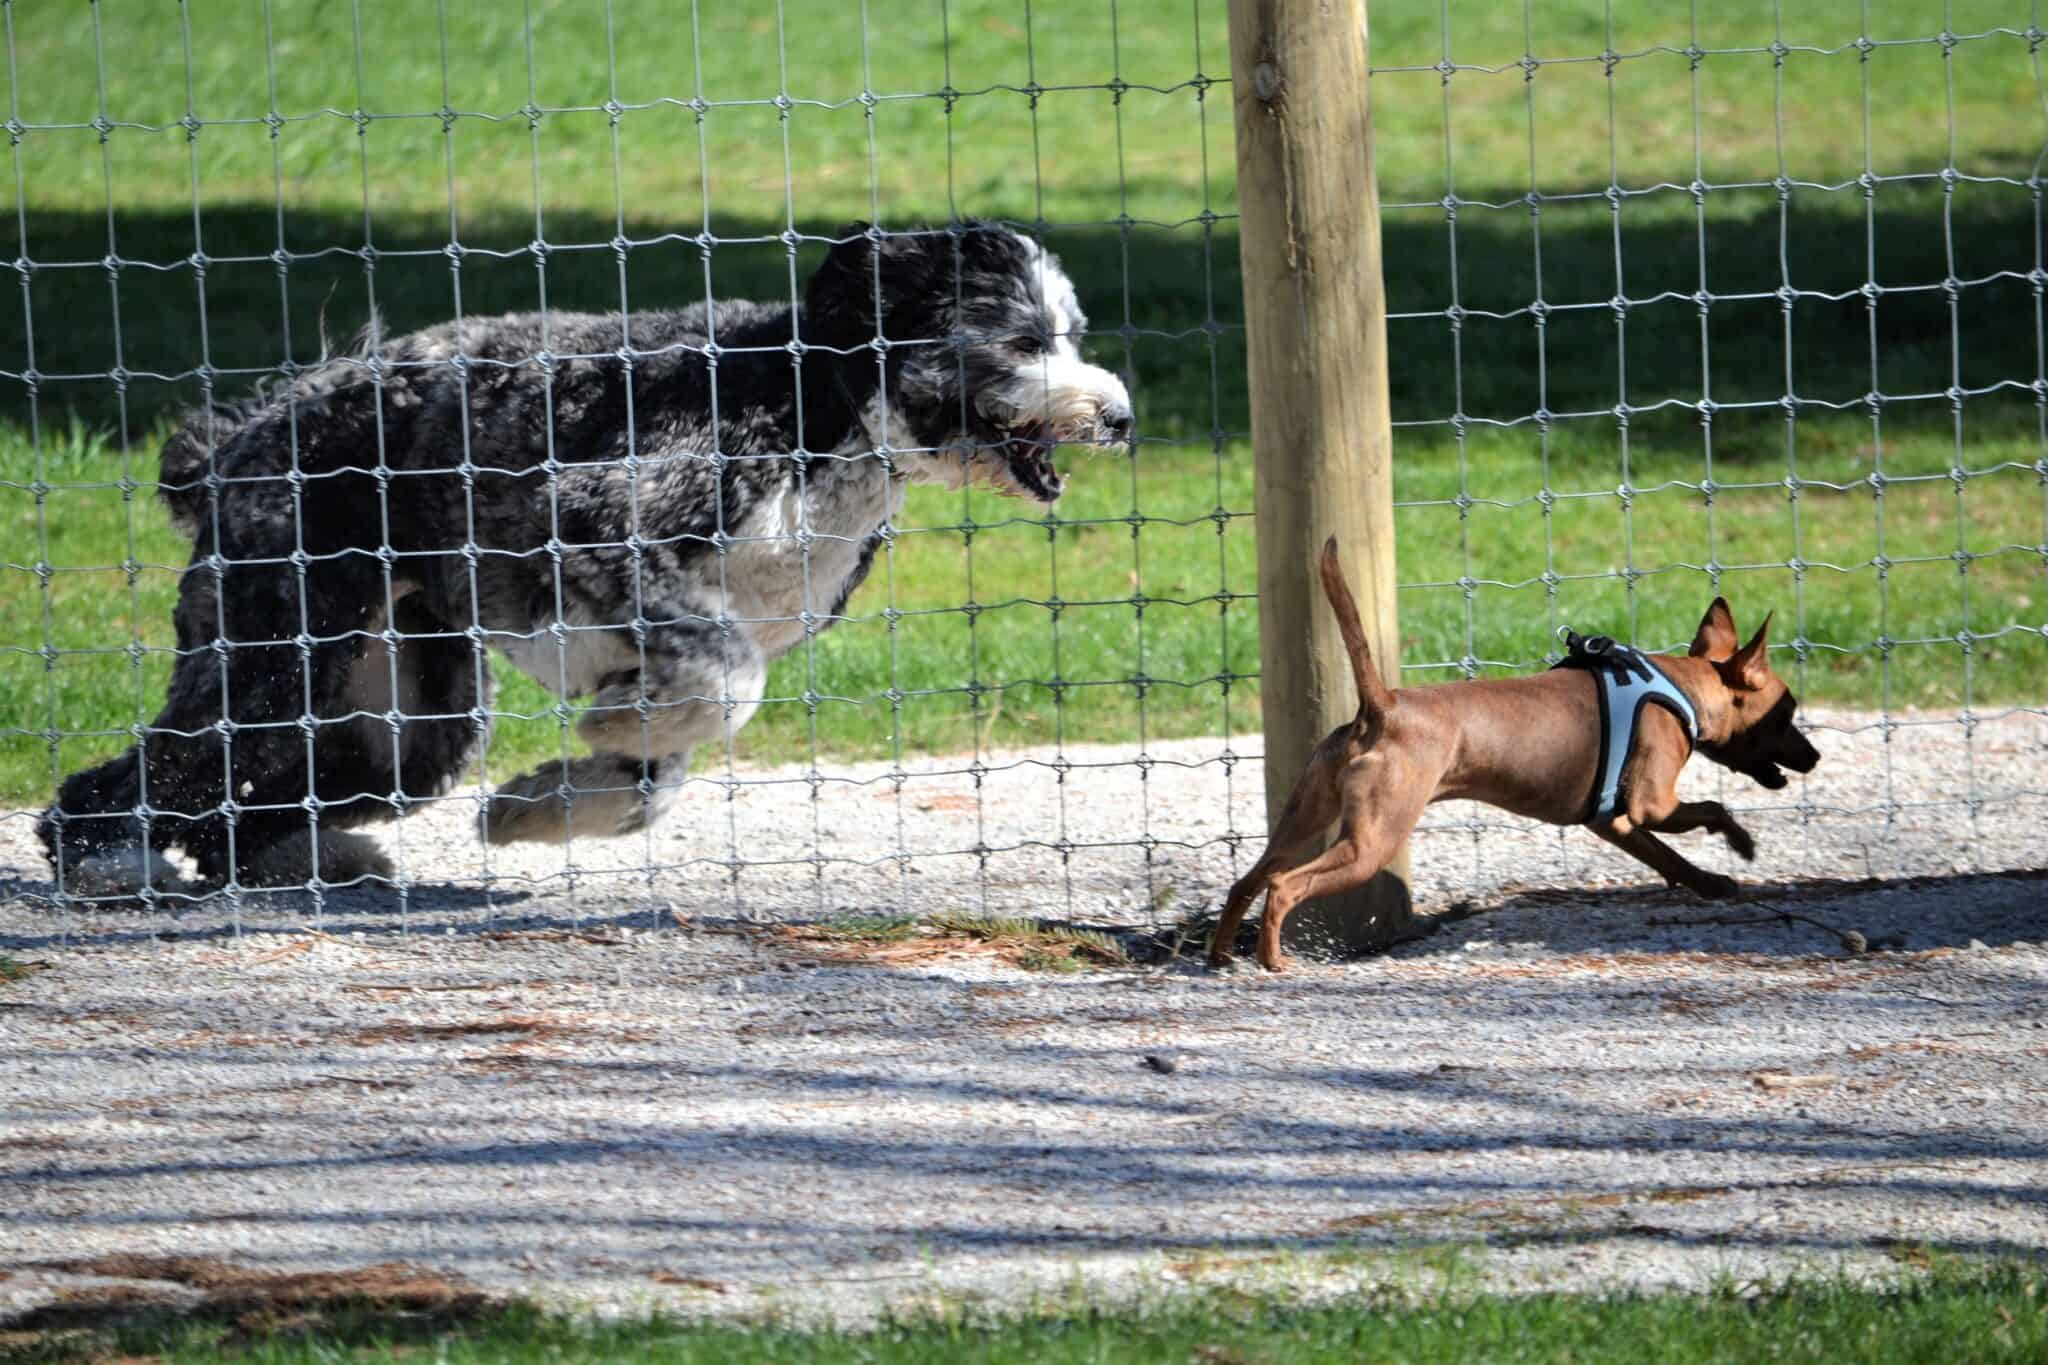 Should You Be Worried About Your Large Dog Around Smaller Dogs?